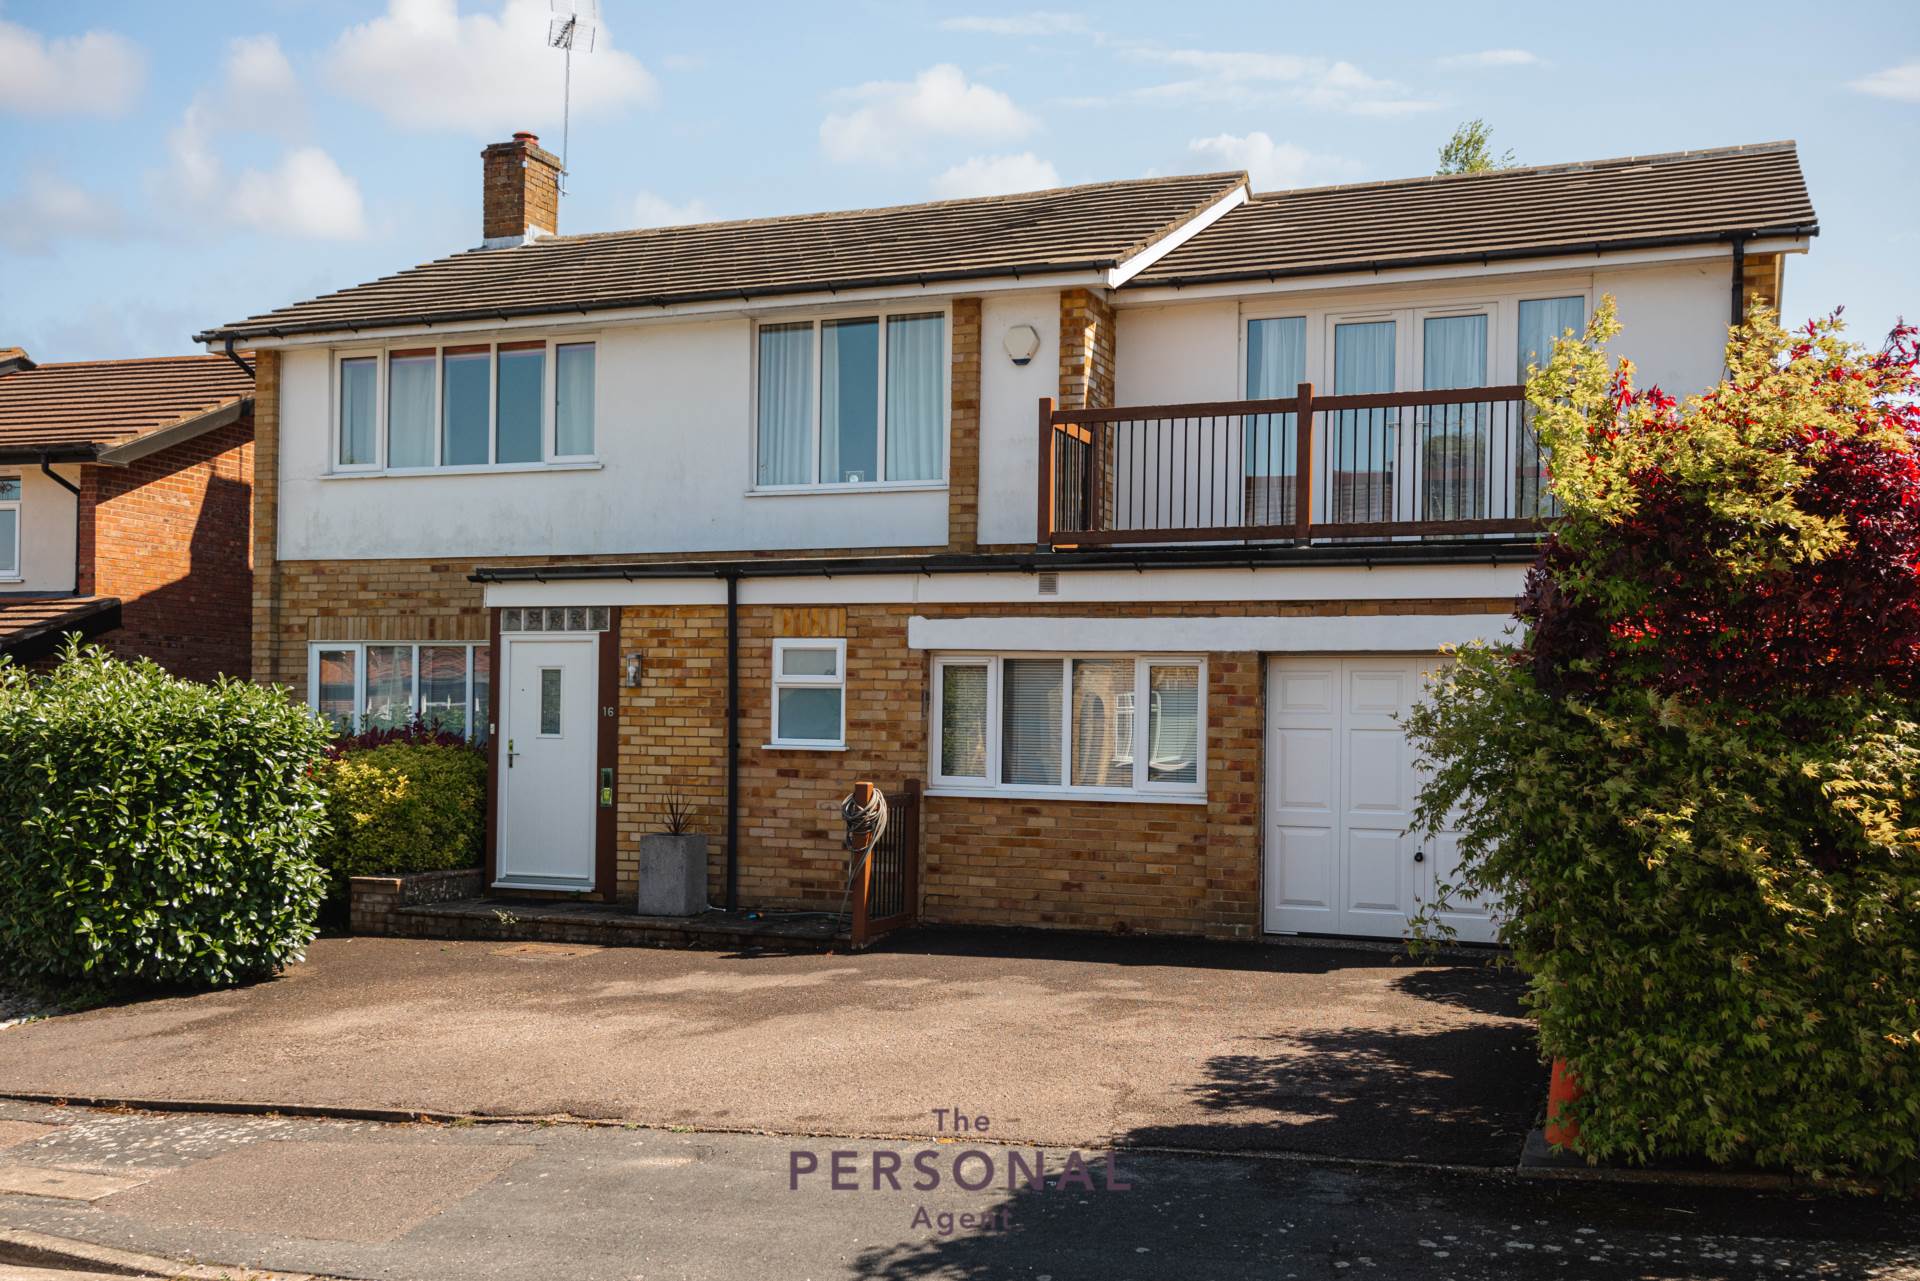 5 bed Detached House for rent in Walton on the Hill. From The Personal Agent - Epsom